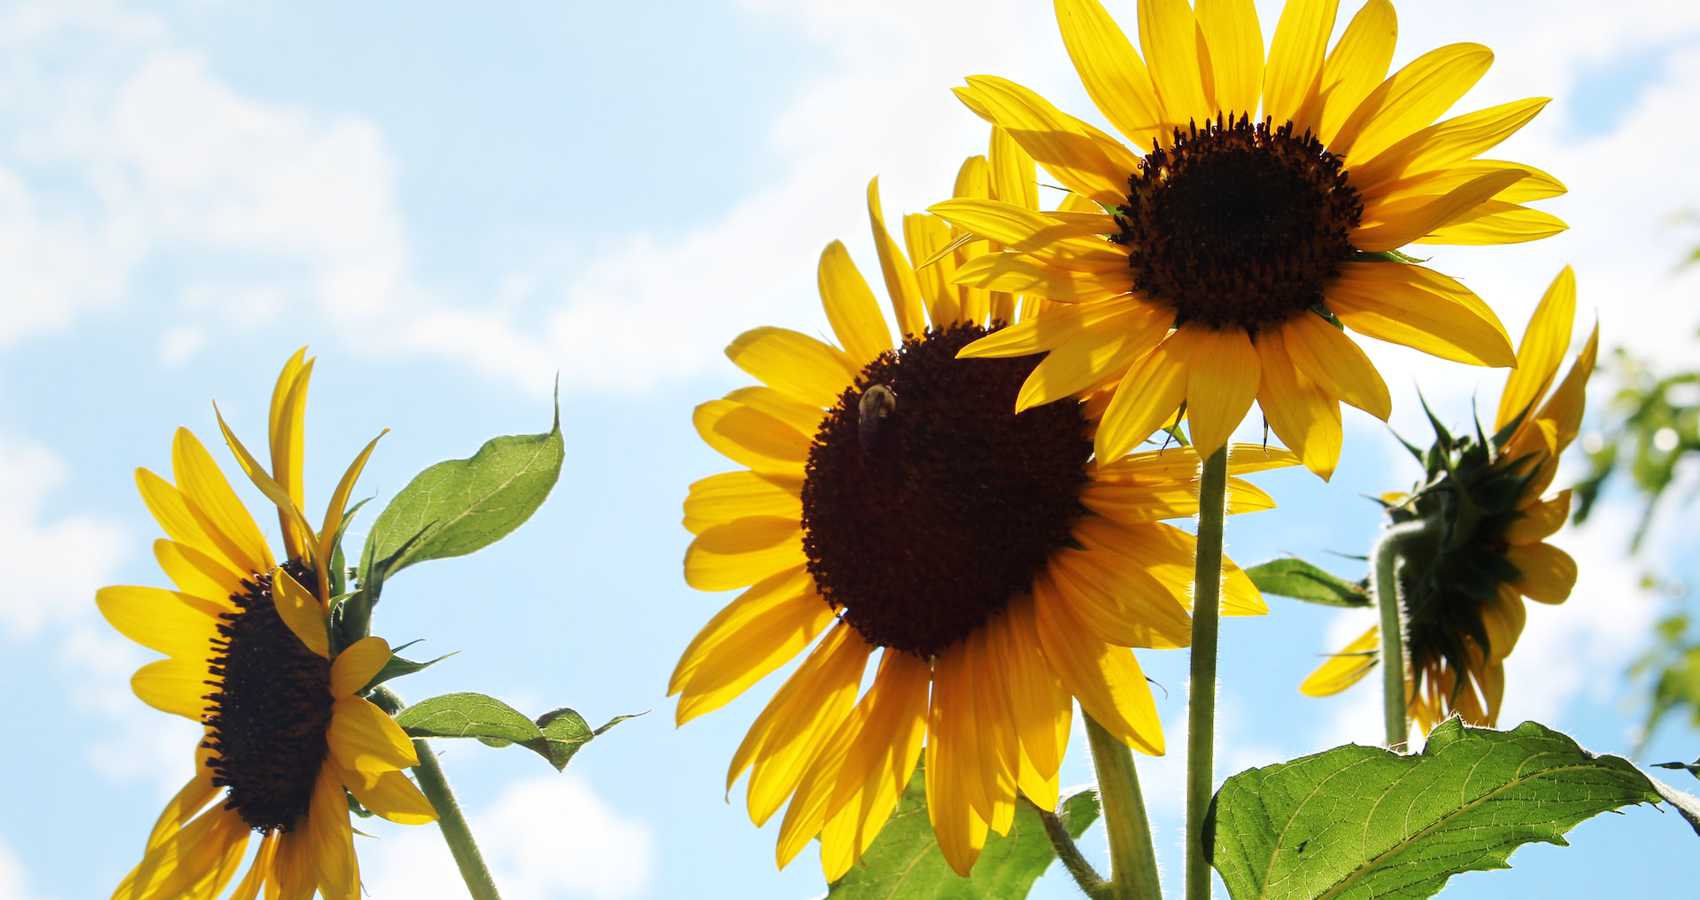 Sunflowers, poetry by D A Angelo at Spilwords.com